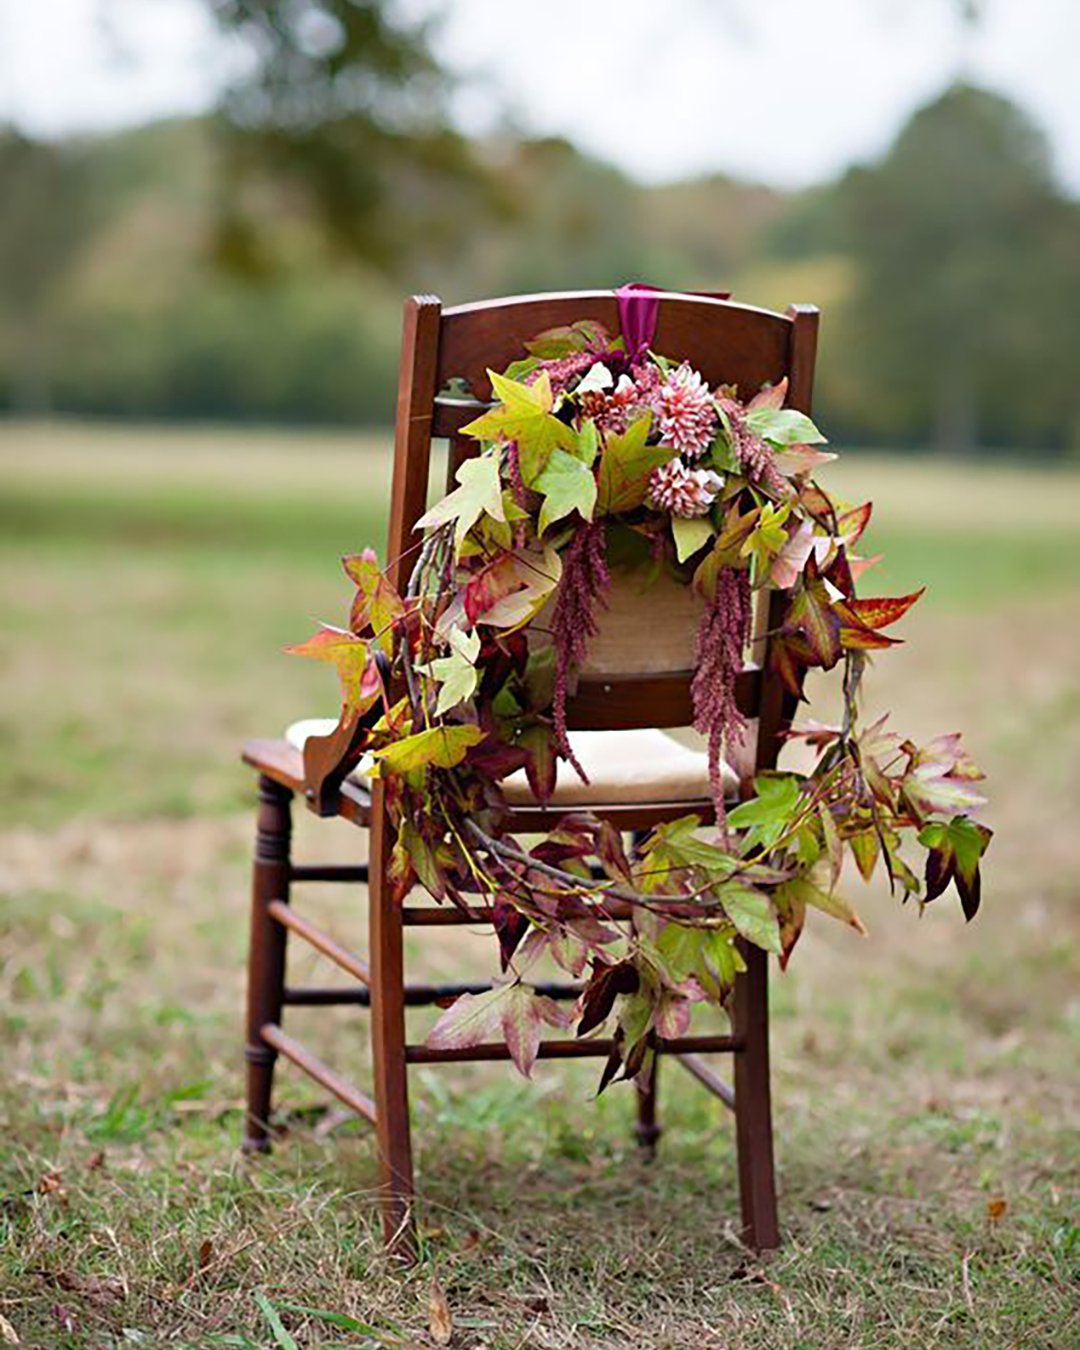 fall wedding decorations white chair decorated with wreath of autumn leaves decor leaves julie anne